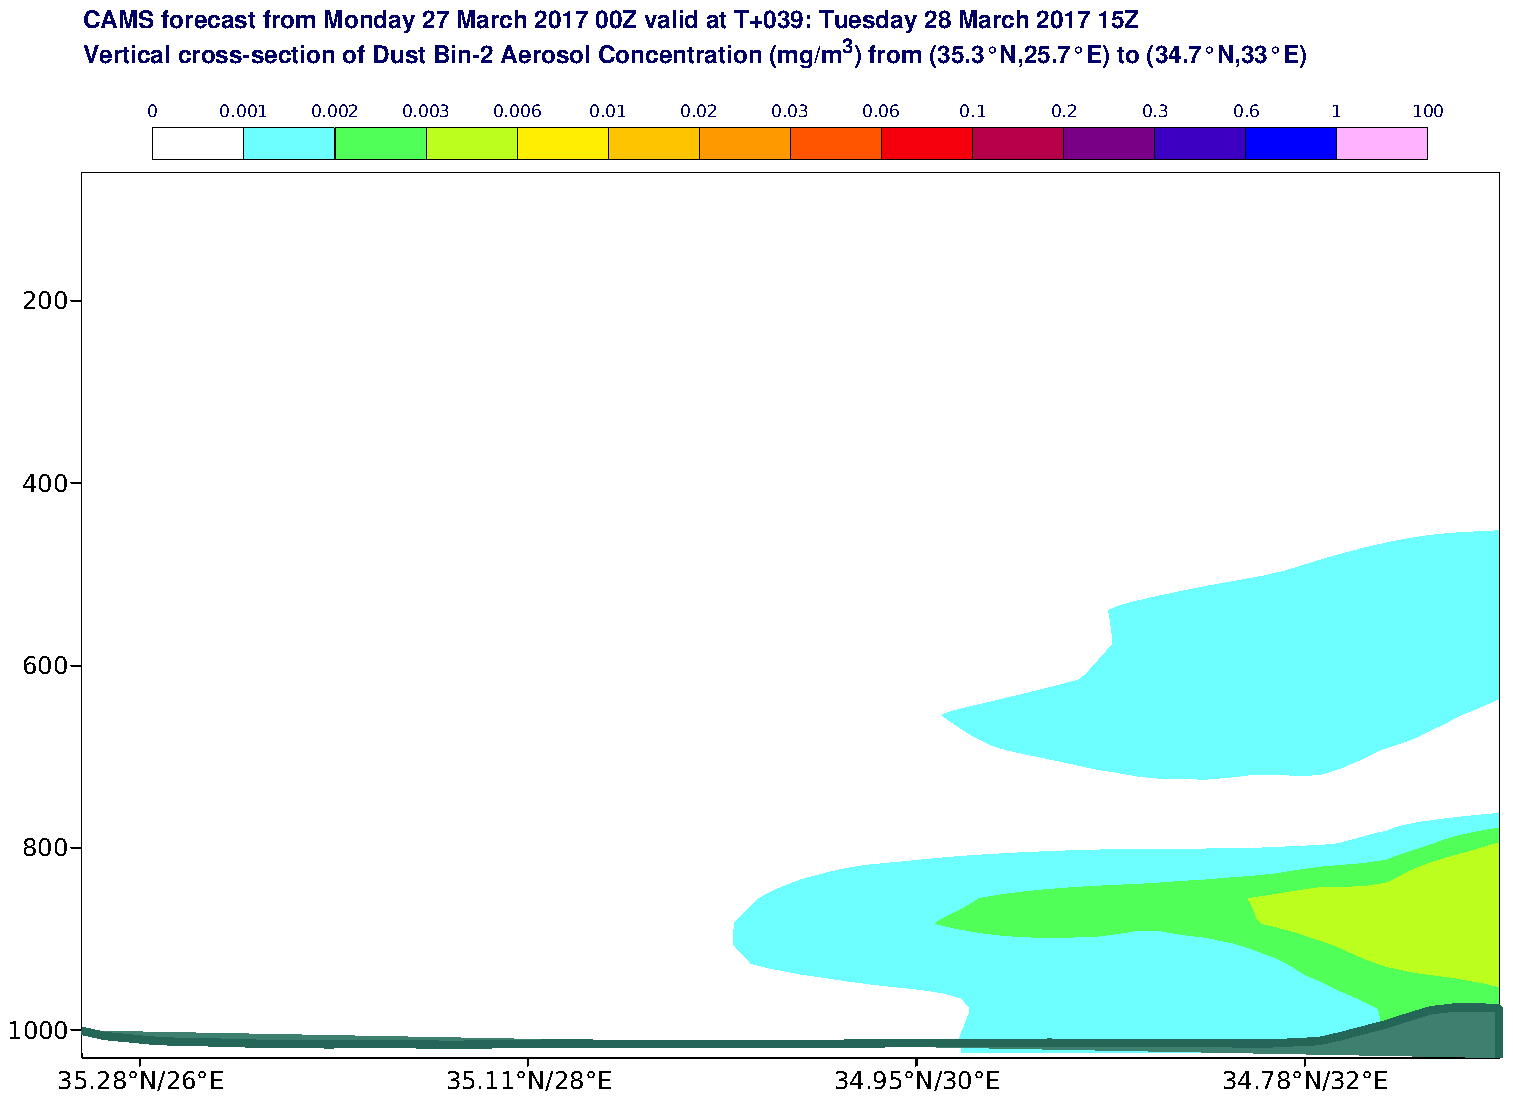 Vertical cross-section of Dust Bin-2 Aerosol Concentration (mg/m3) valid at T39 - 2017-03-28 15:00